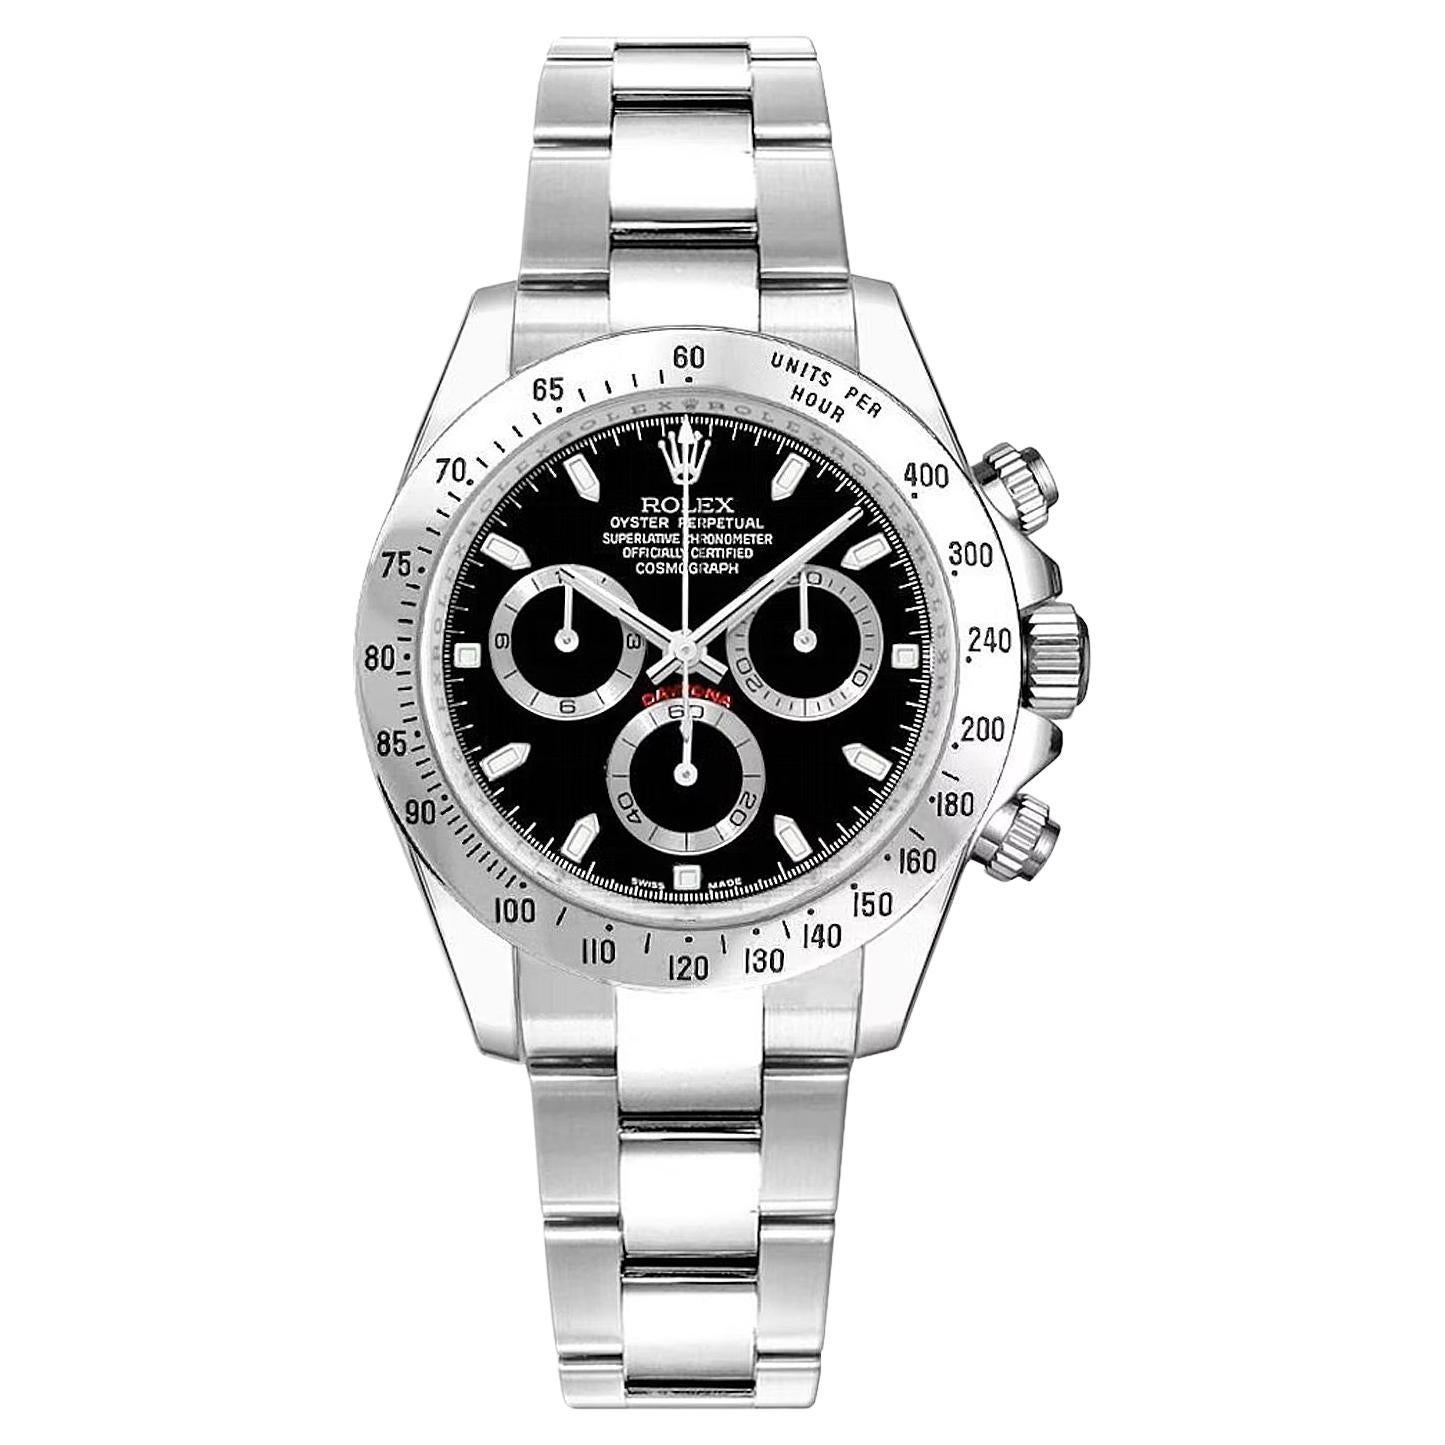 Rolex Cosmograph Daytona Black Dial Stainless Steel Automatic Mens Watch 116520